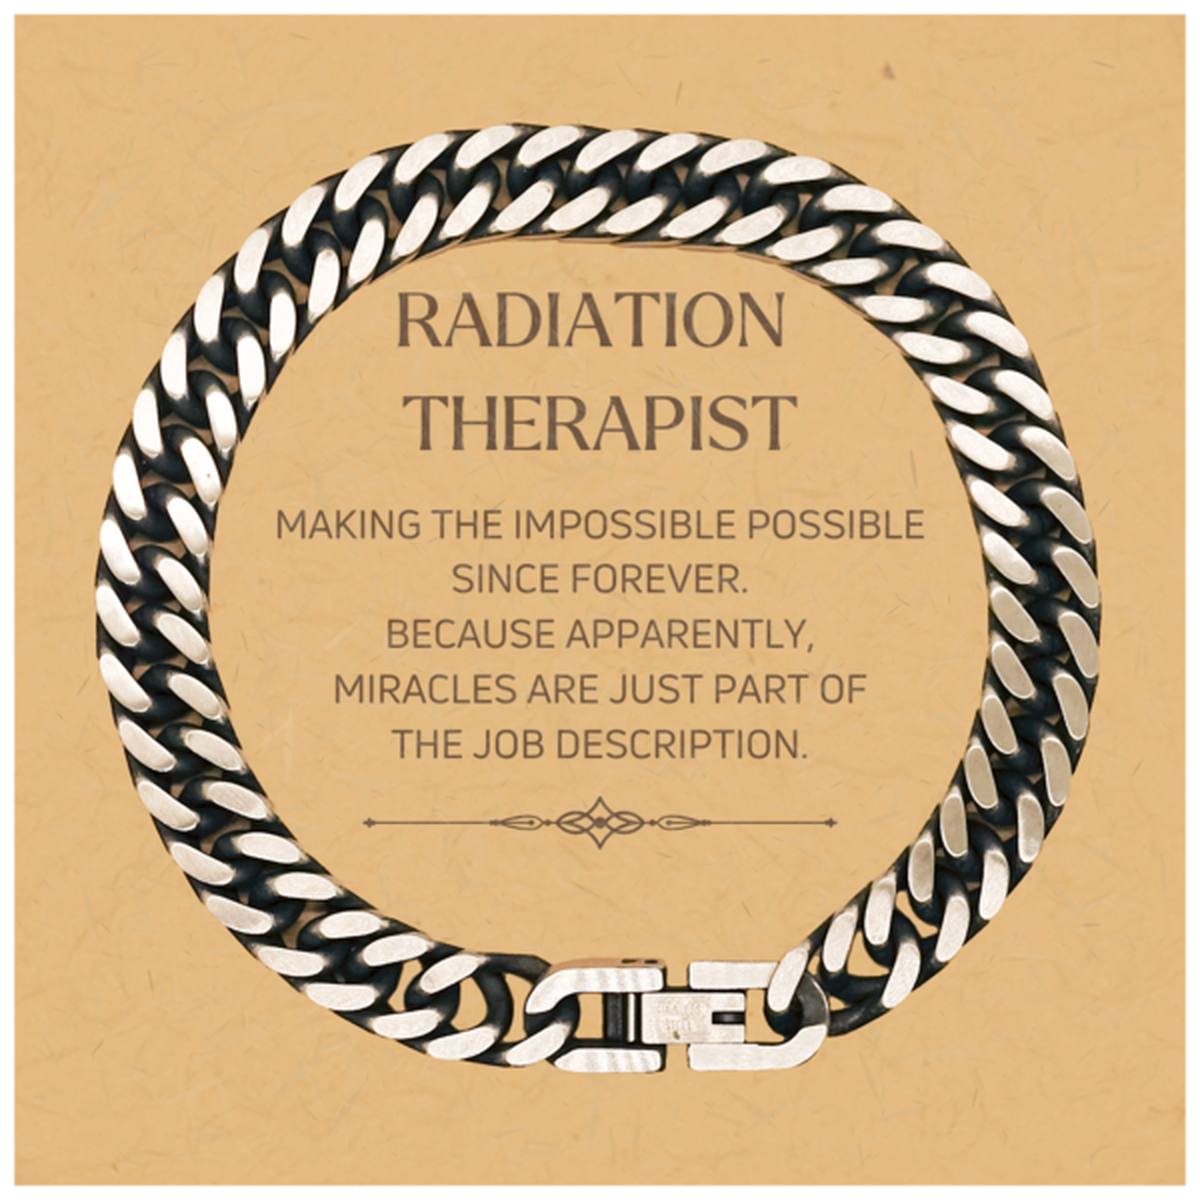 Funny Radiation Therapist Gifts, Miracles are just part of the job description, Inspirational Birthday Christmas Cuban Link Chain Bracelet For Radiation Therapist, Men, Women, Coworkers, Friends, Boss